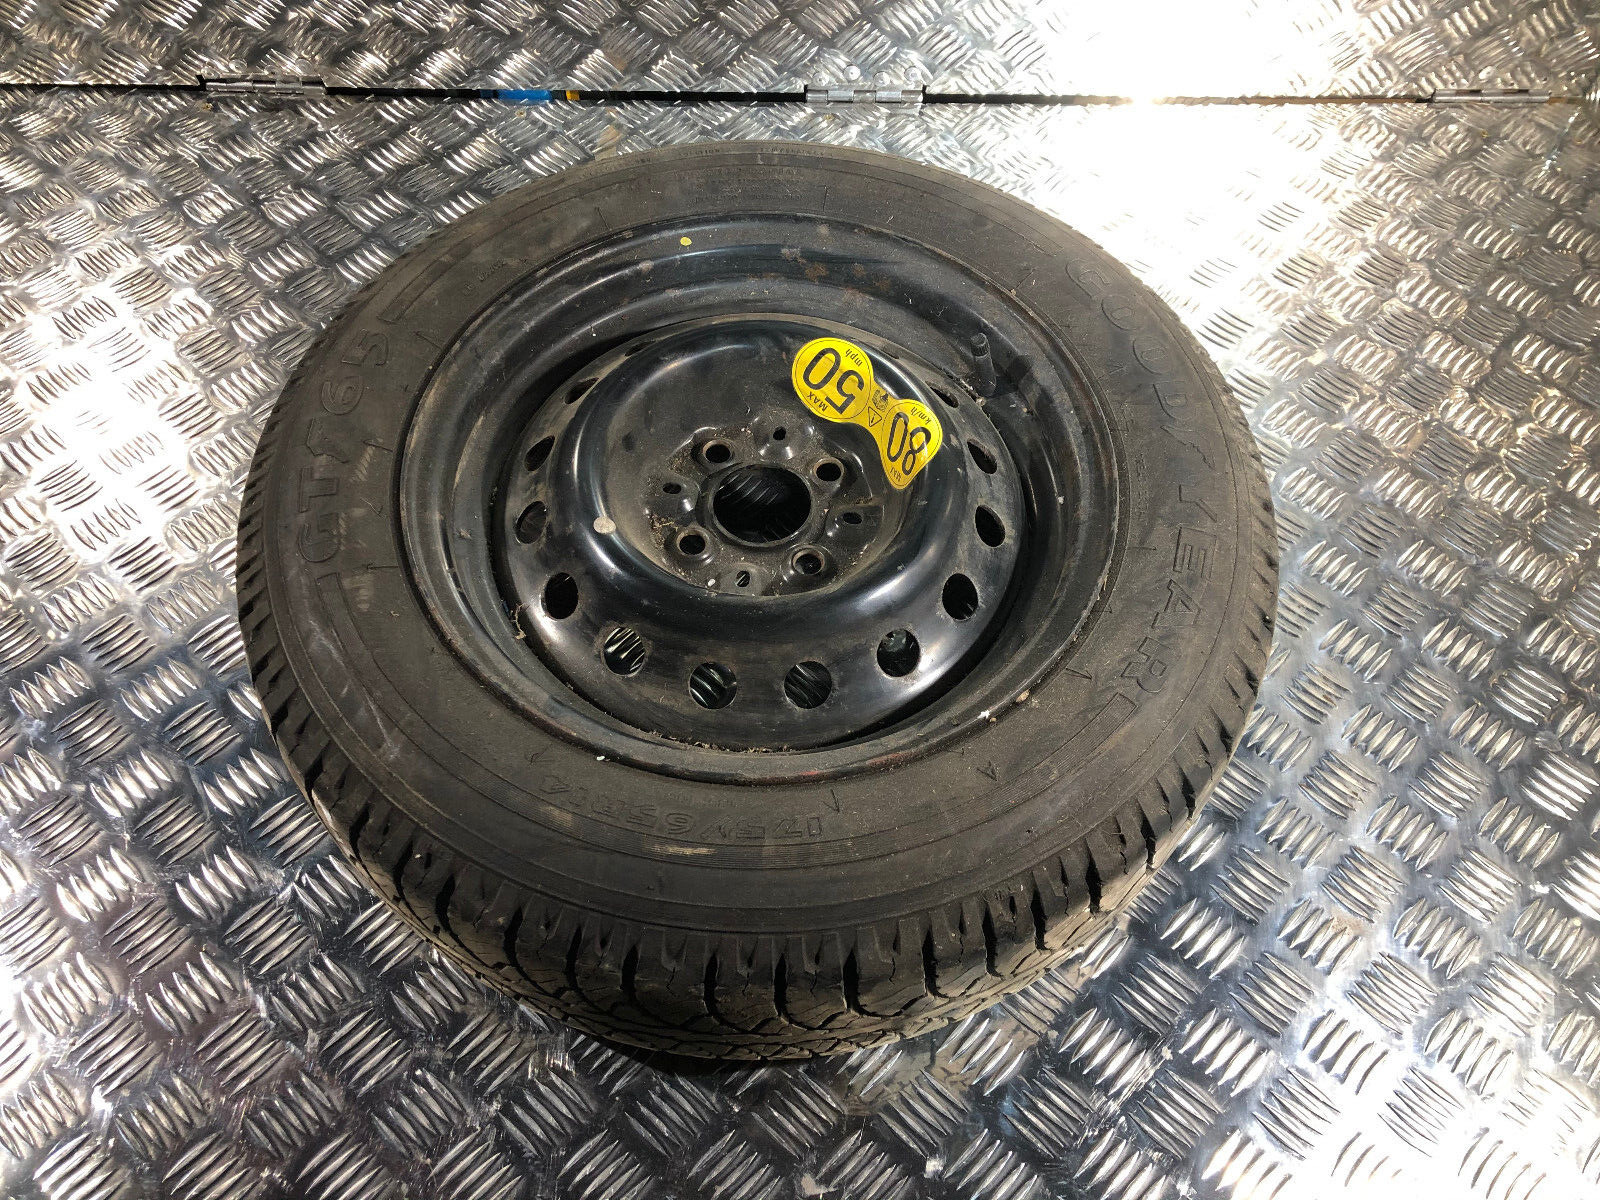 MGF MG TF 14 INCH SPARE WHEEL PLUS GOODYEAR 175/65R14 TYRE 5mm